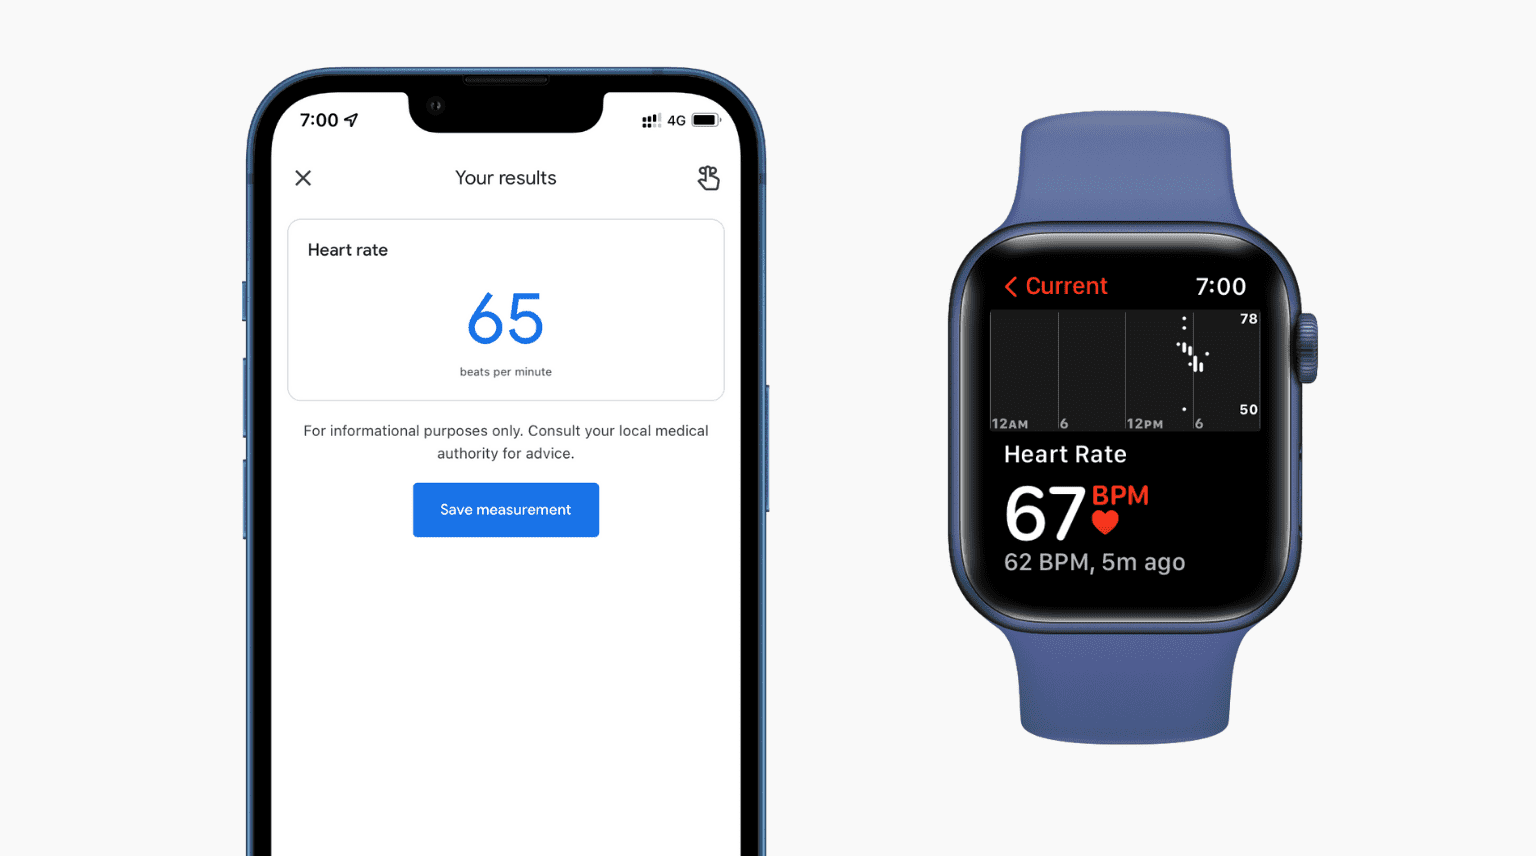 Heart-rate-from-Google-Fit-and-Apple-Watch-7-PM